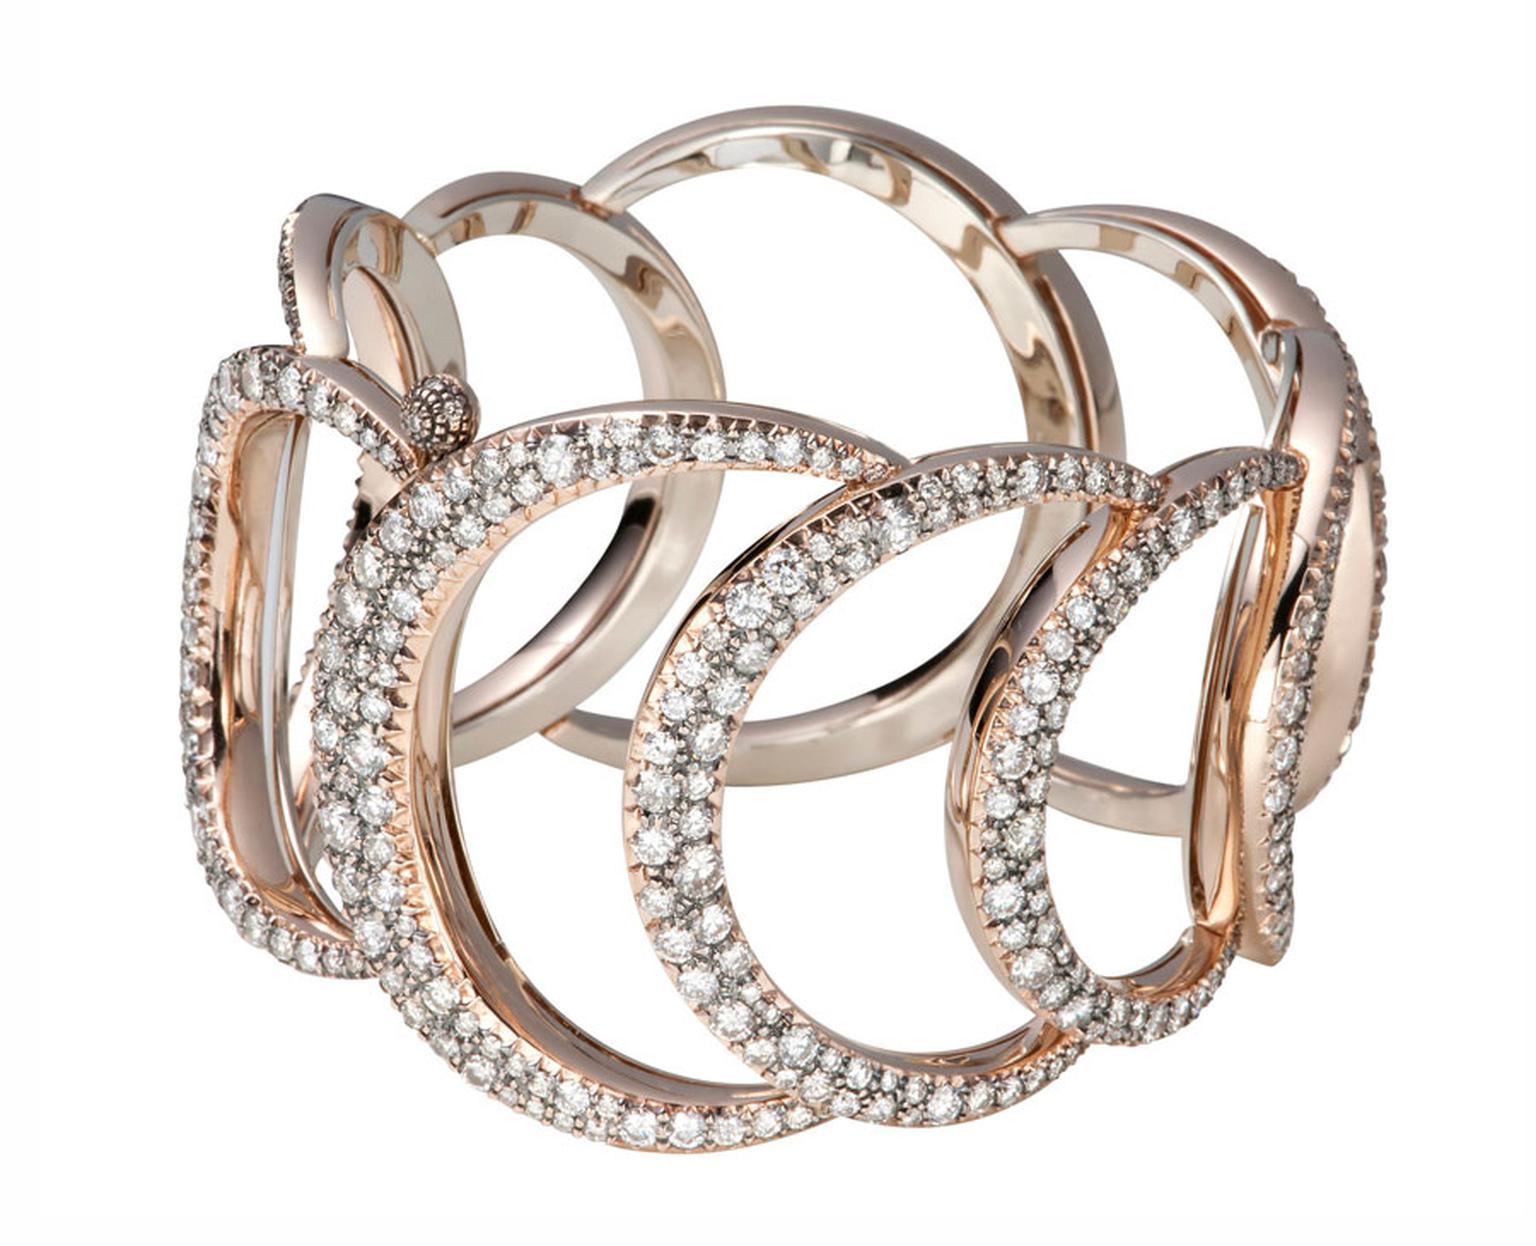 H-Stern-Bracelet-in-rose-and-Noble-gold-with-diamonds